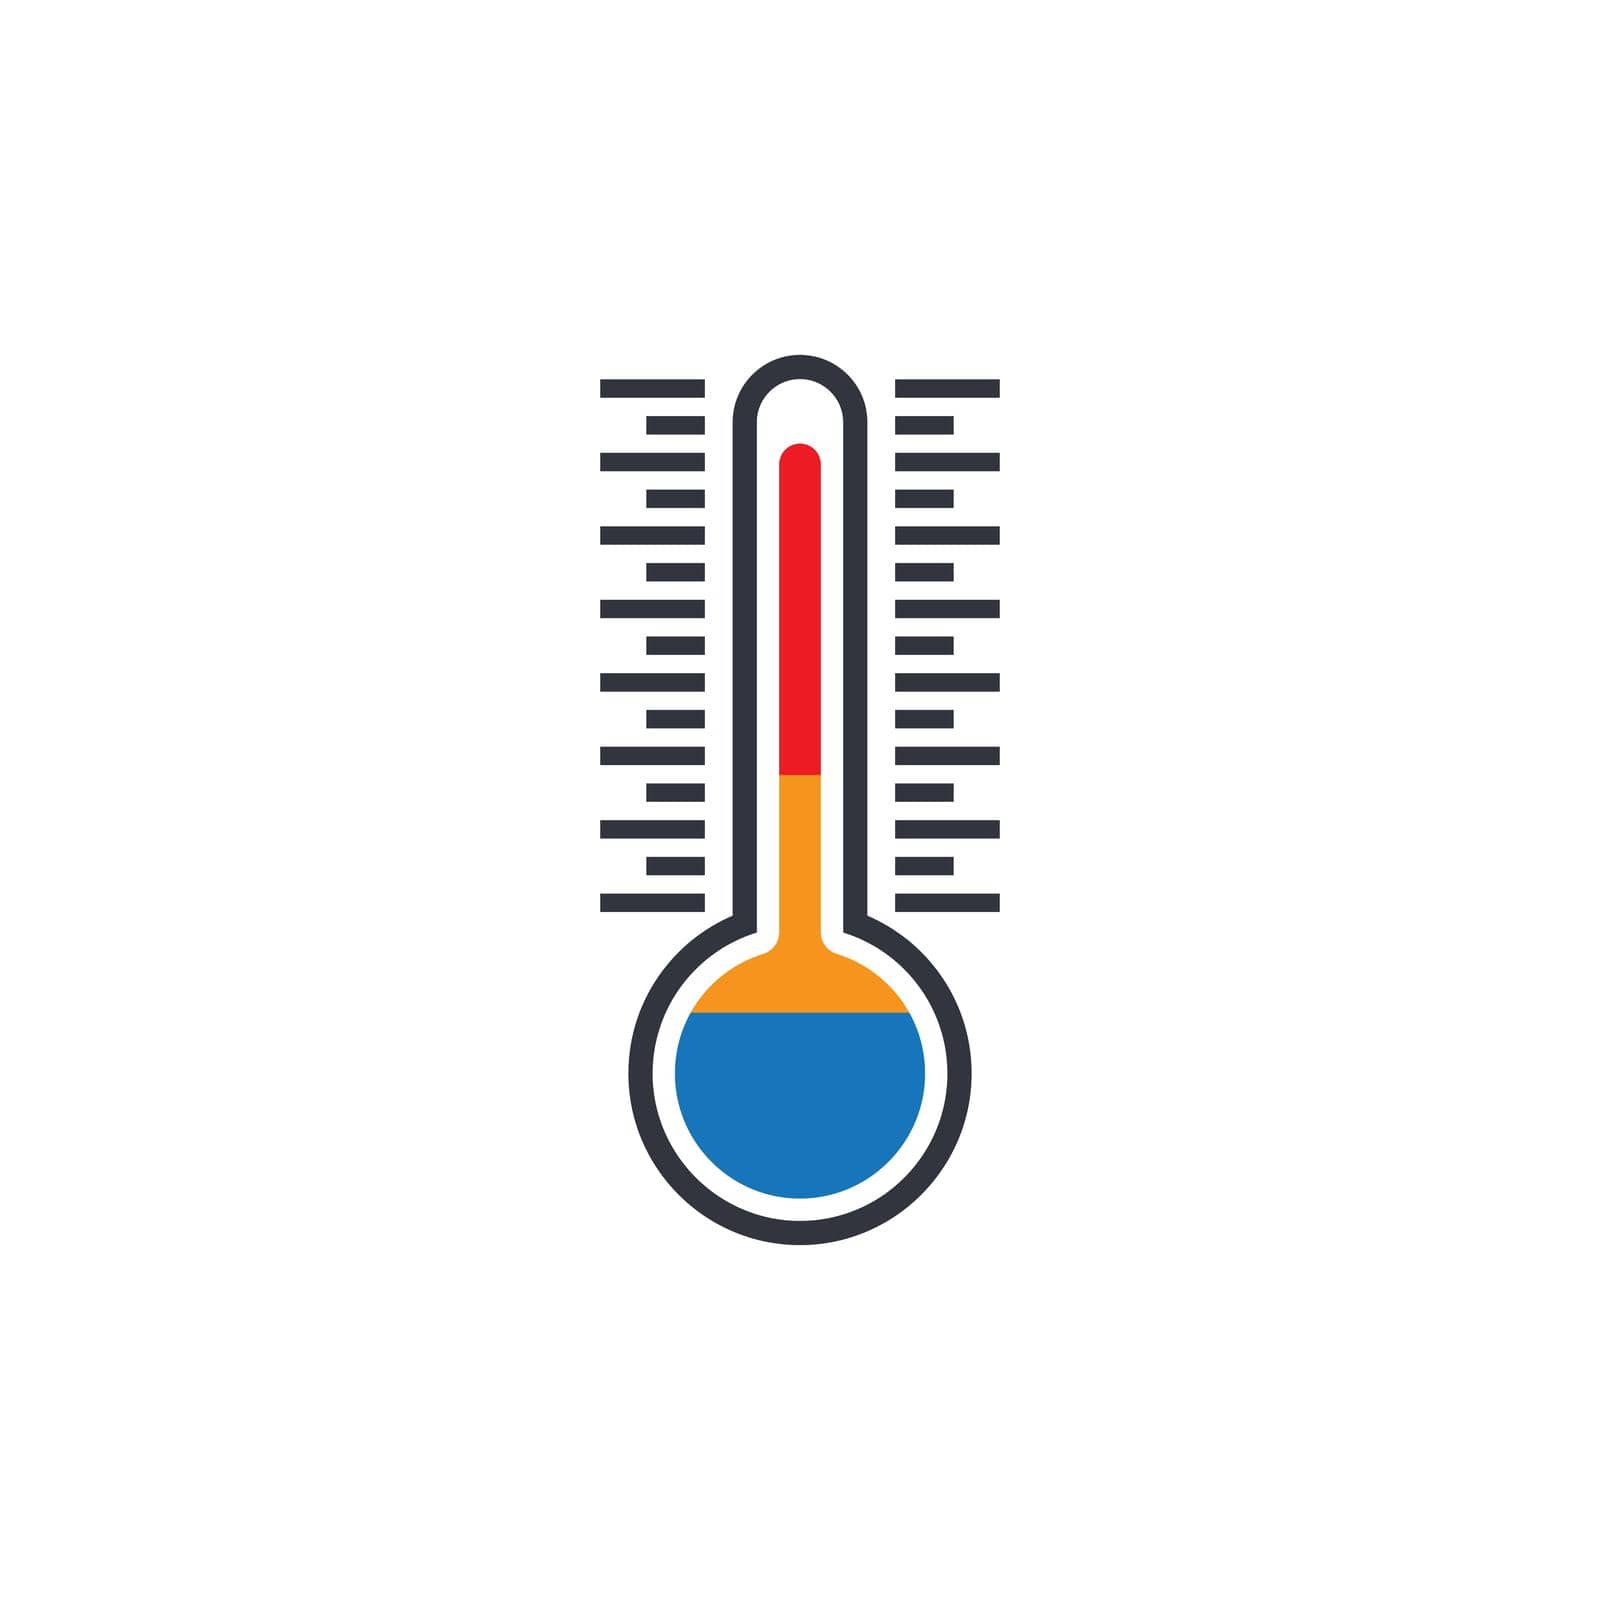 Thermometer vector icon illustration by Attades19